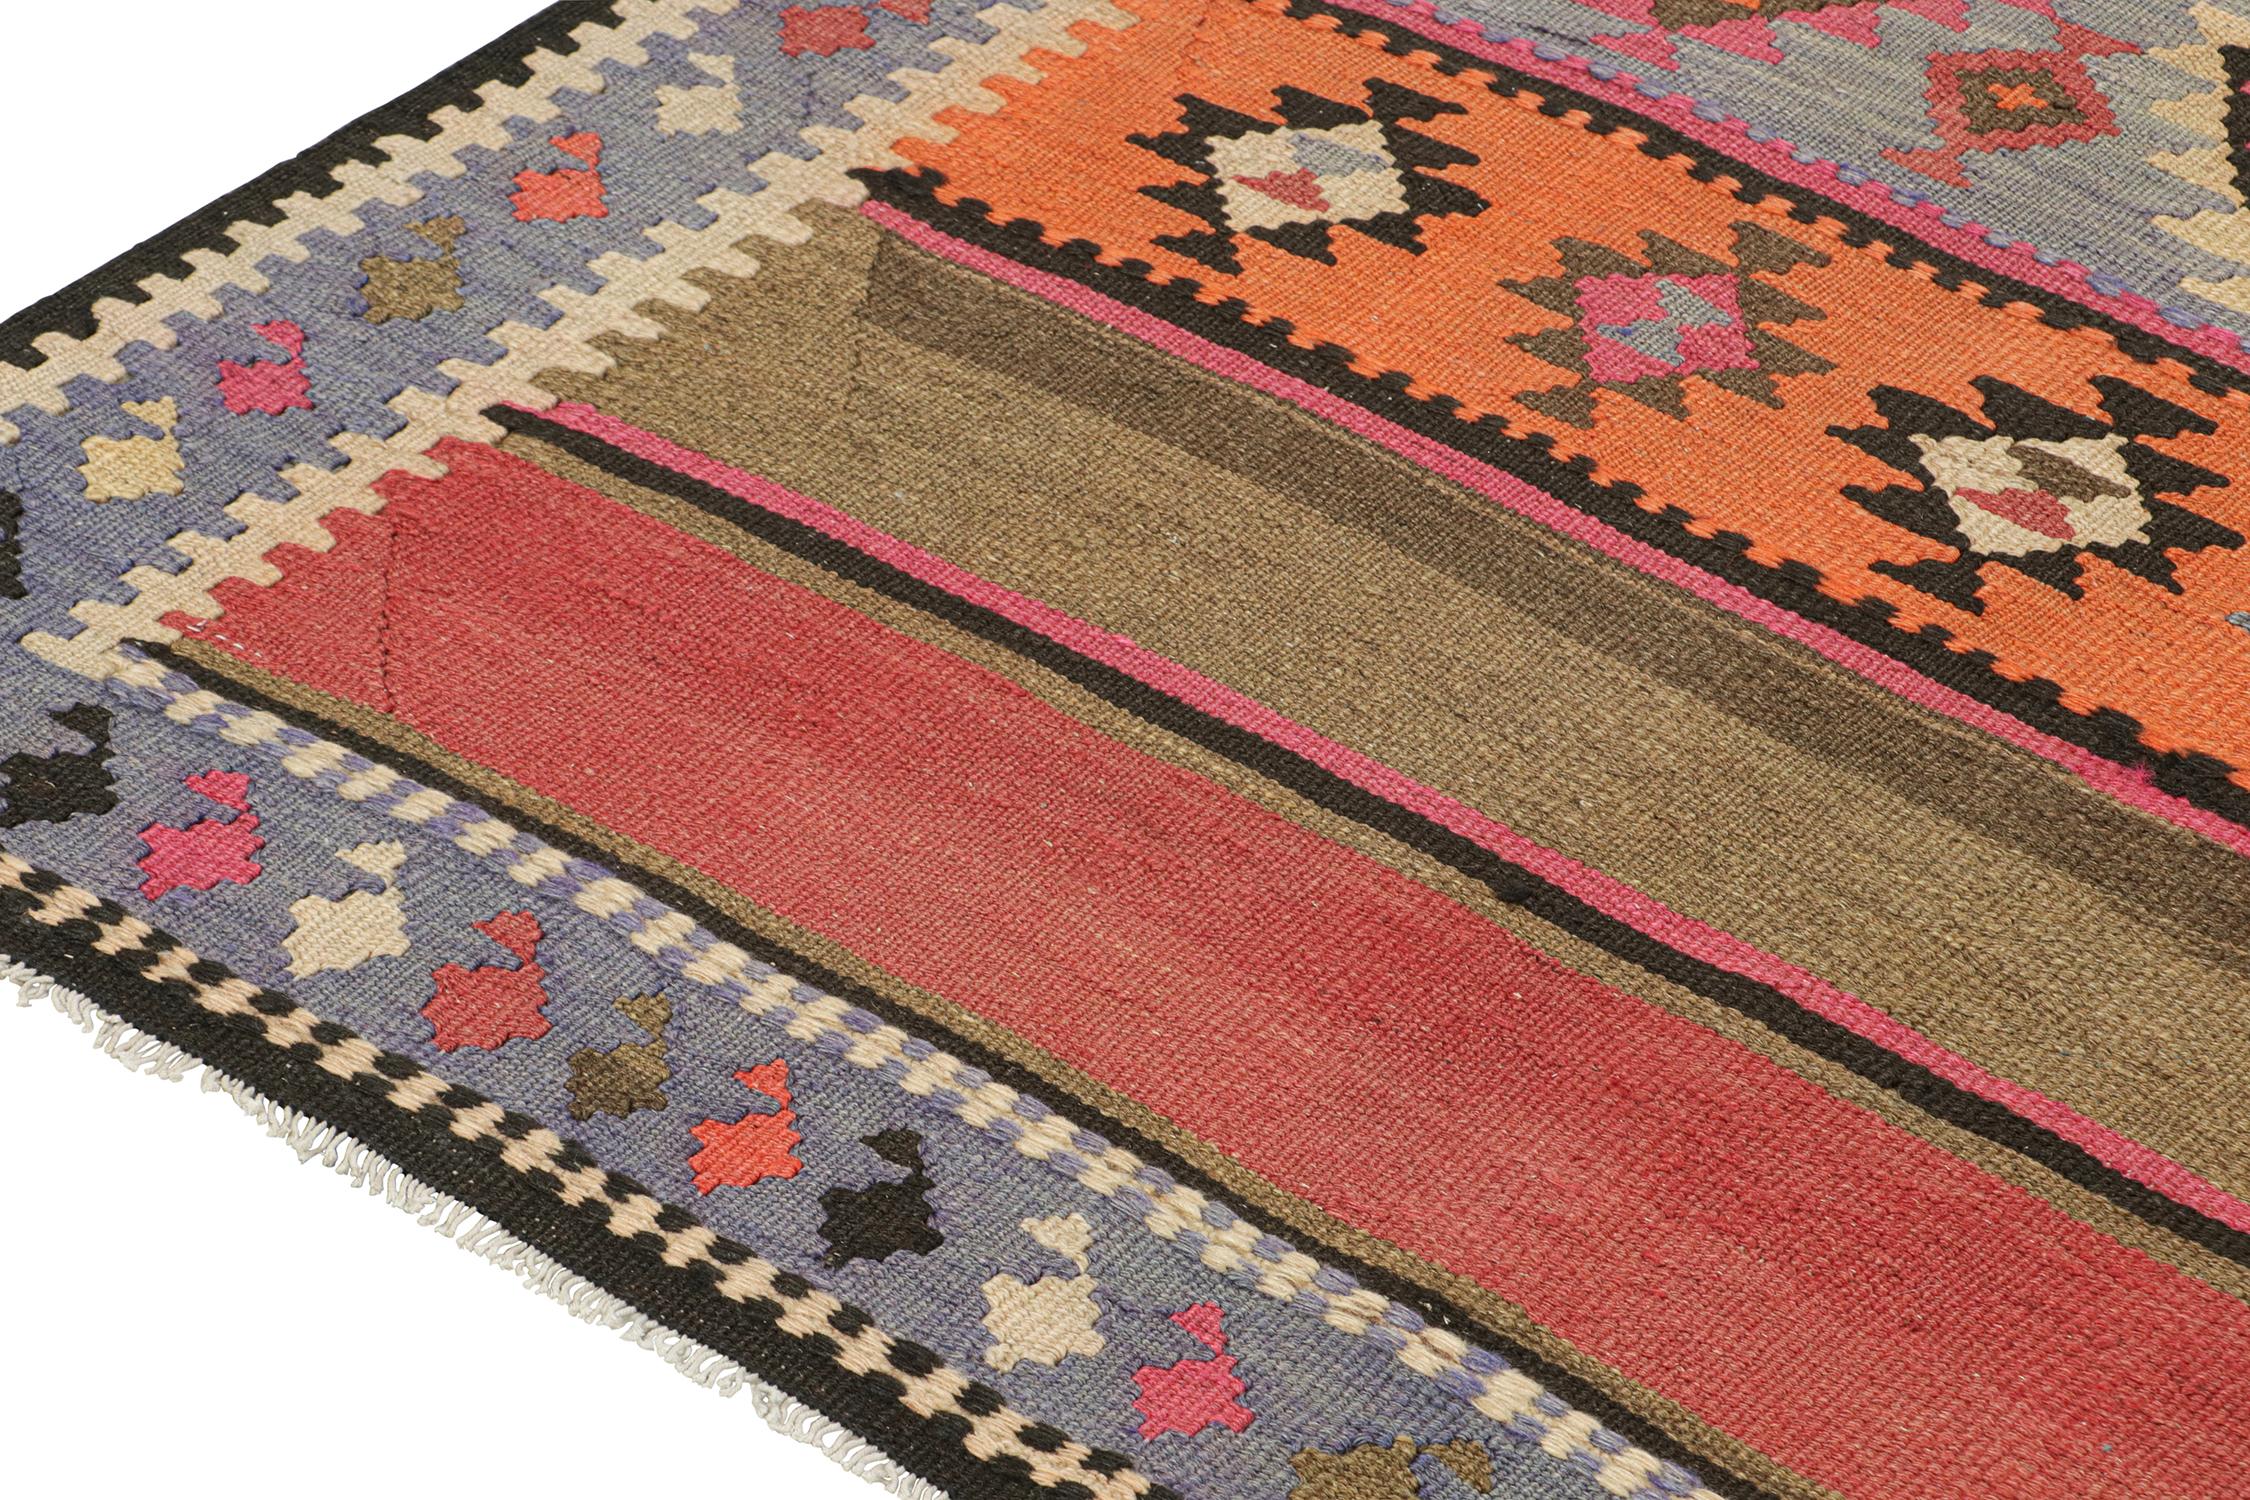 Vintage Northwest Persian Kilim with Vibrant Geometric Patterns by Rug & Kilim In Good Condition For Sale In Long Island City, NY